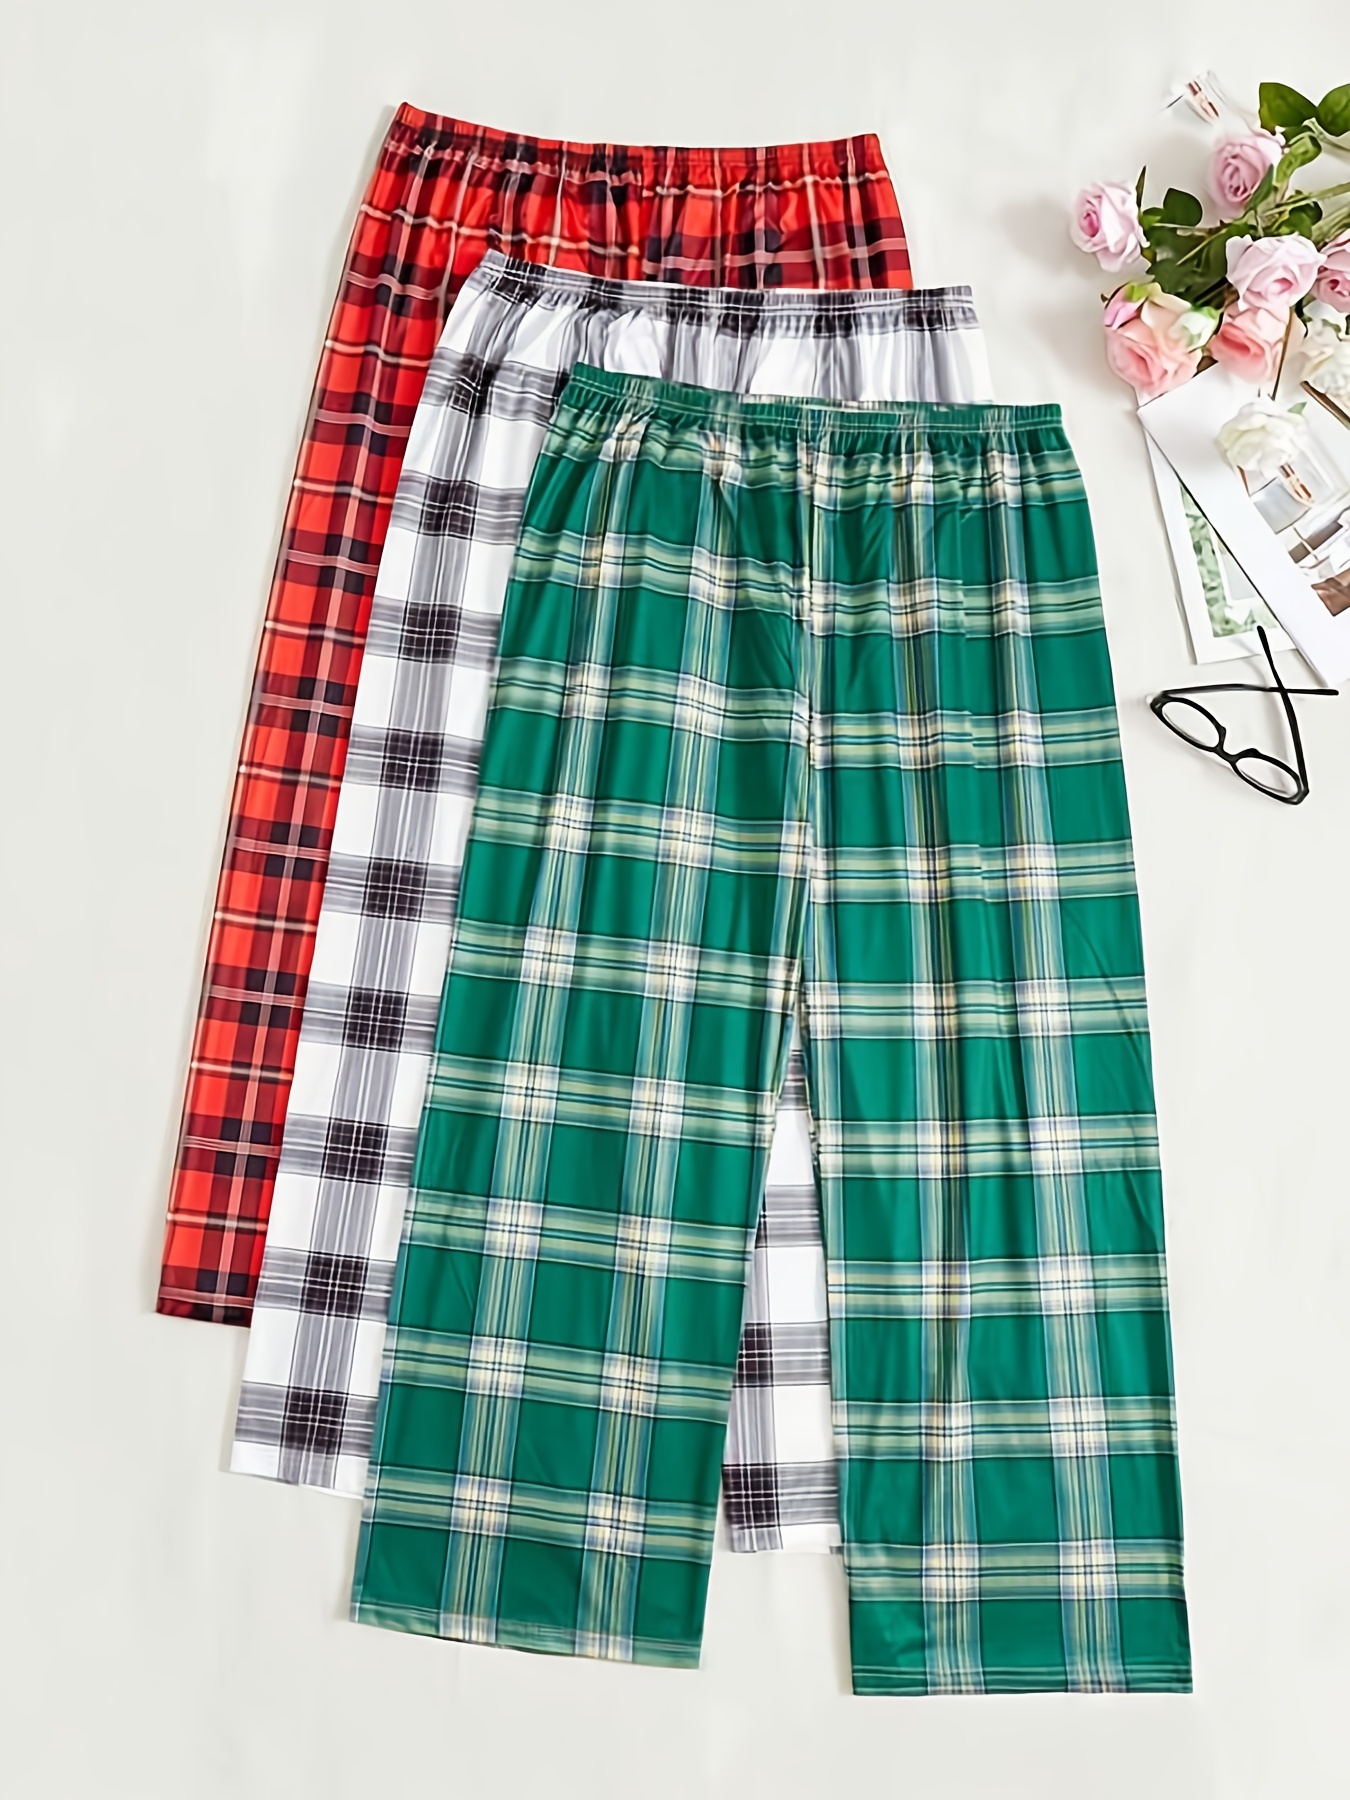 Red Plaid Flannel PJ Pants for Adults -  Canada